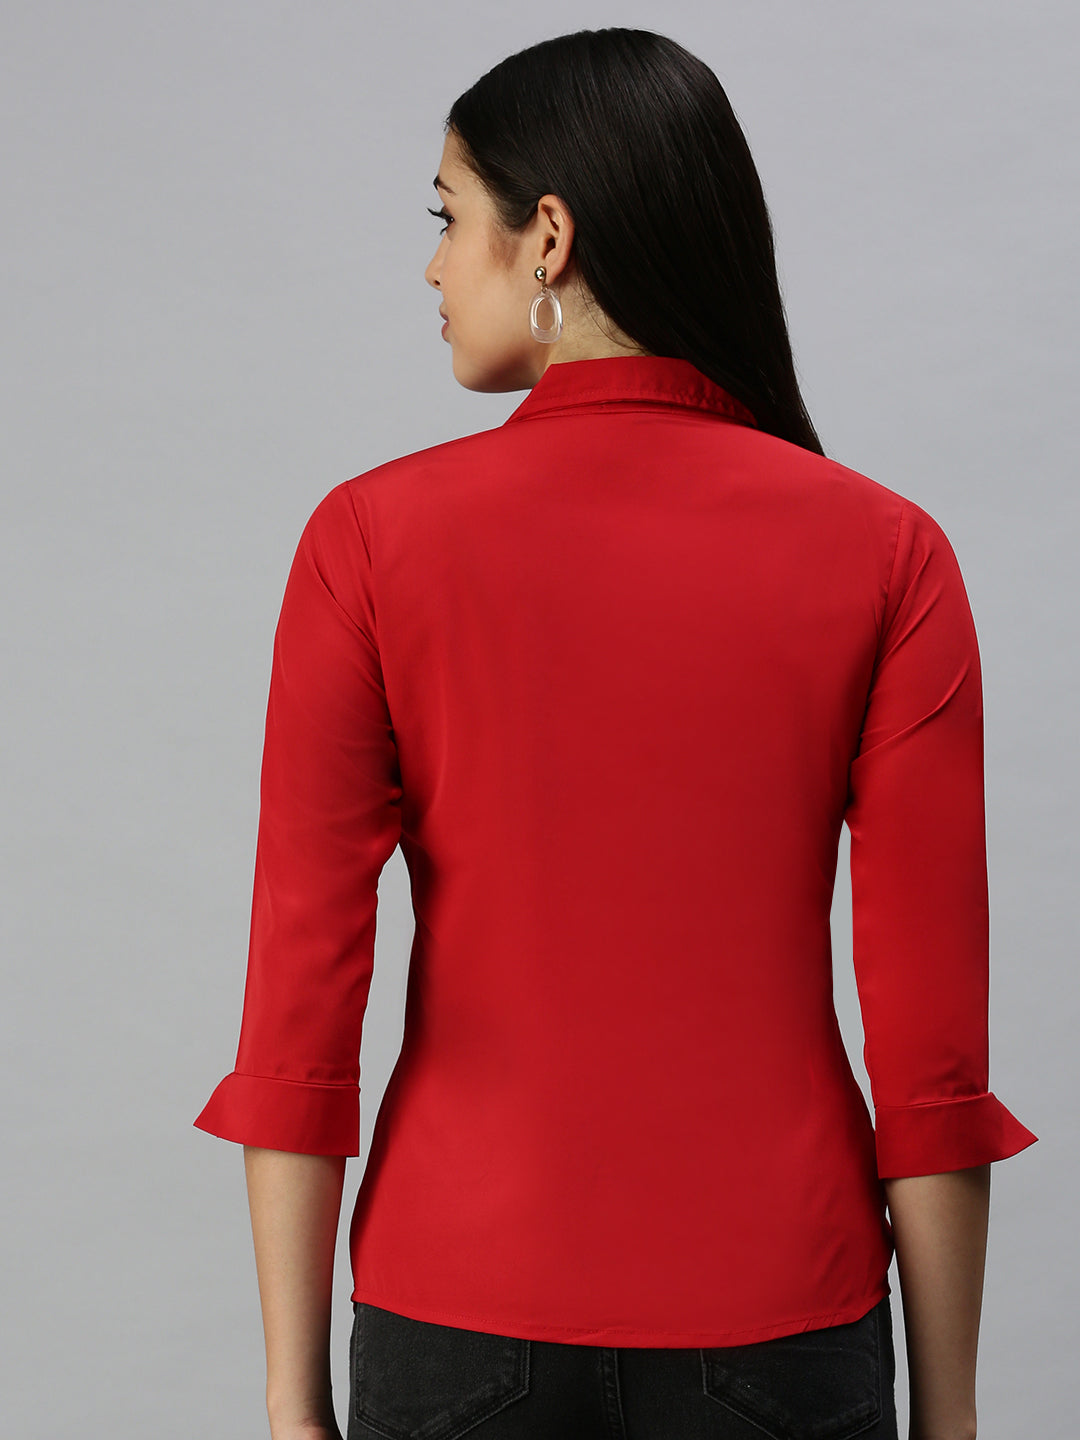 Women's Red Solid Shirt